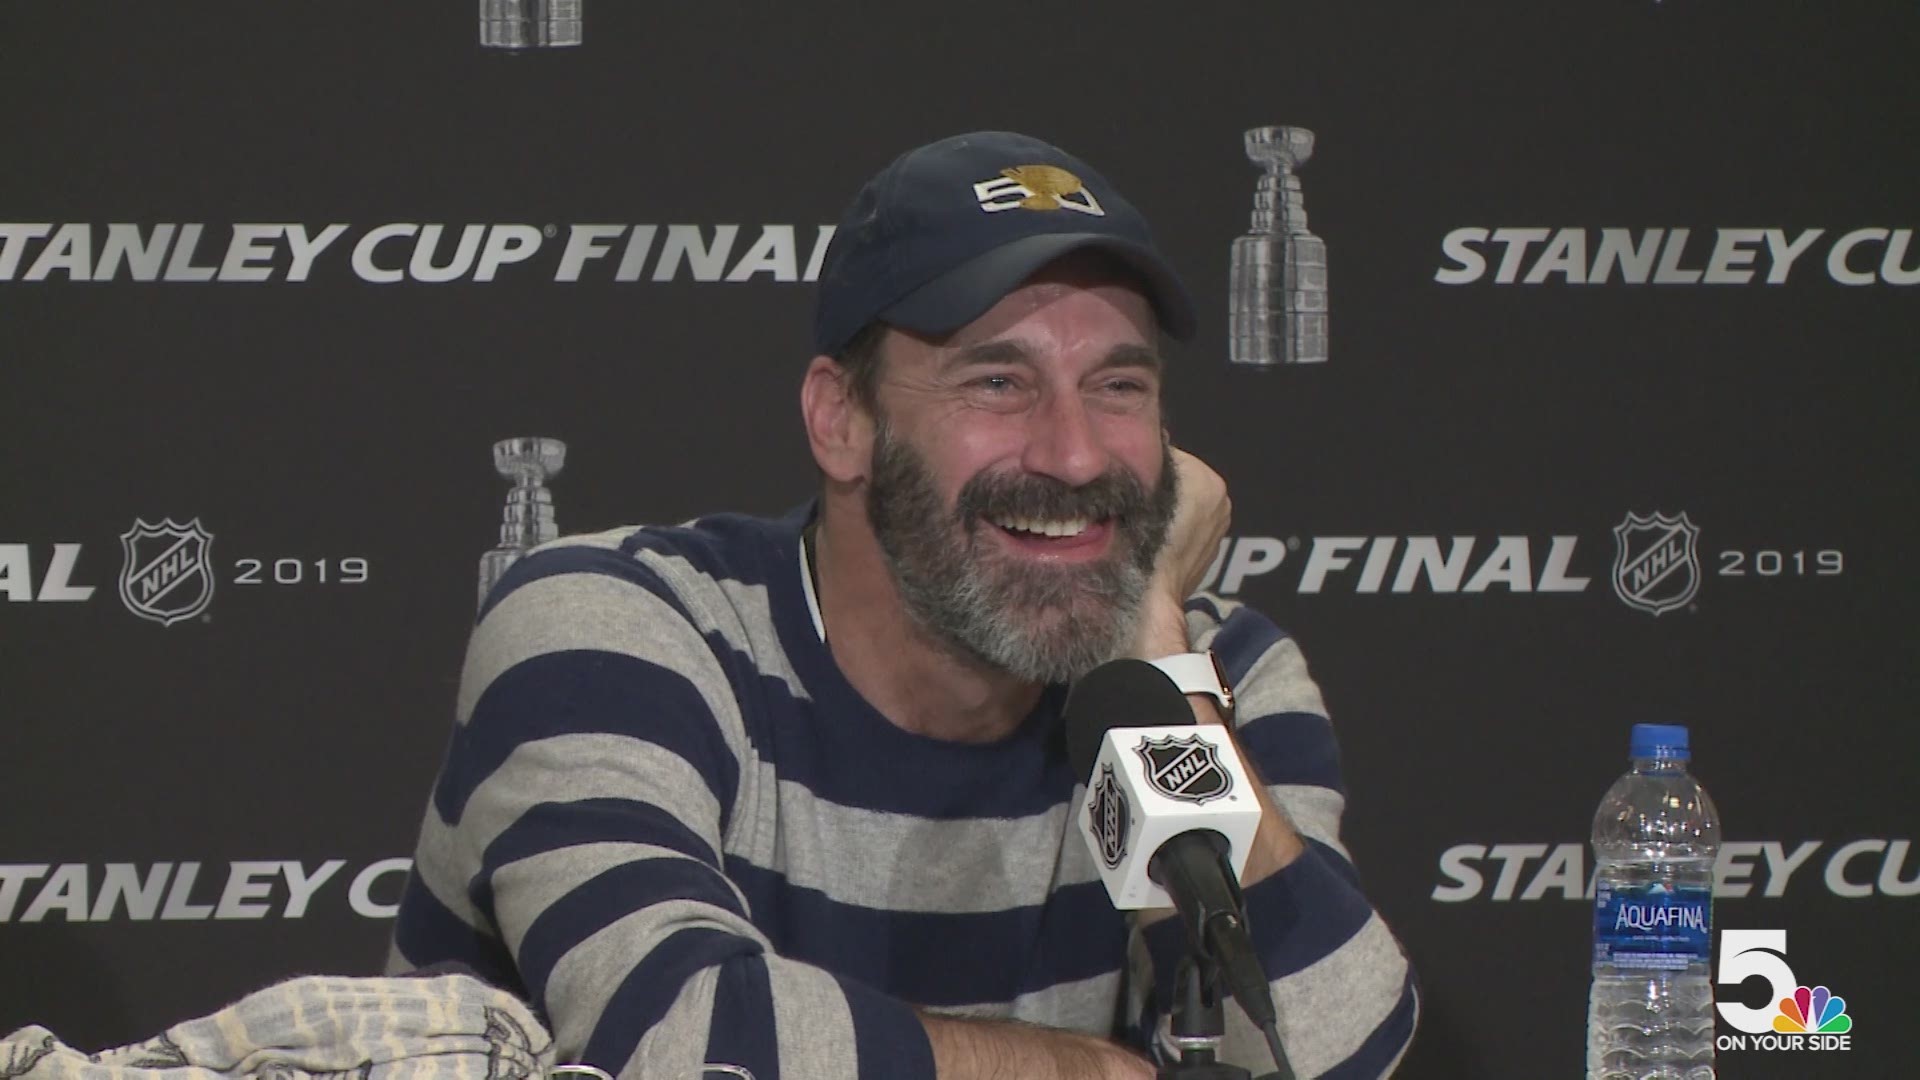 Jon Hamm sports his St. Louis Blues hat while he heads out for